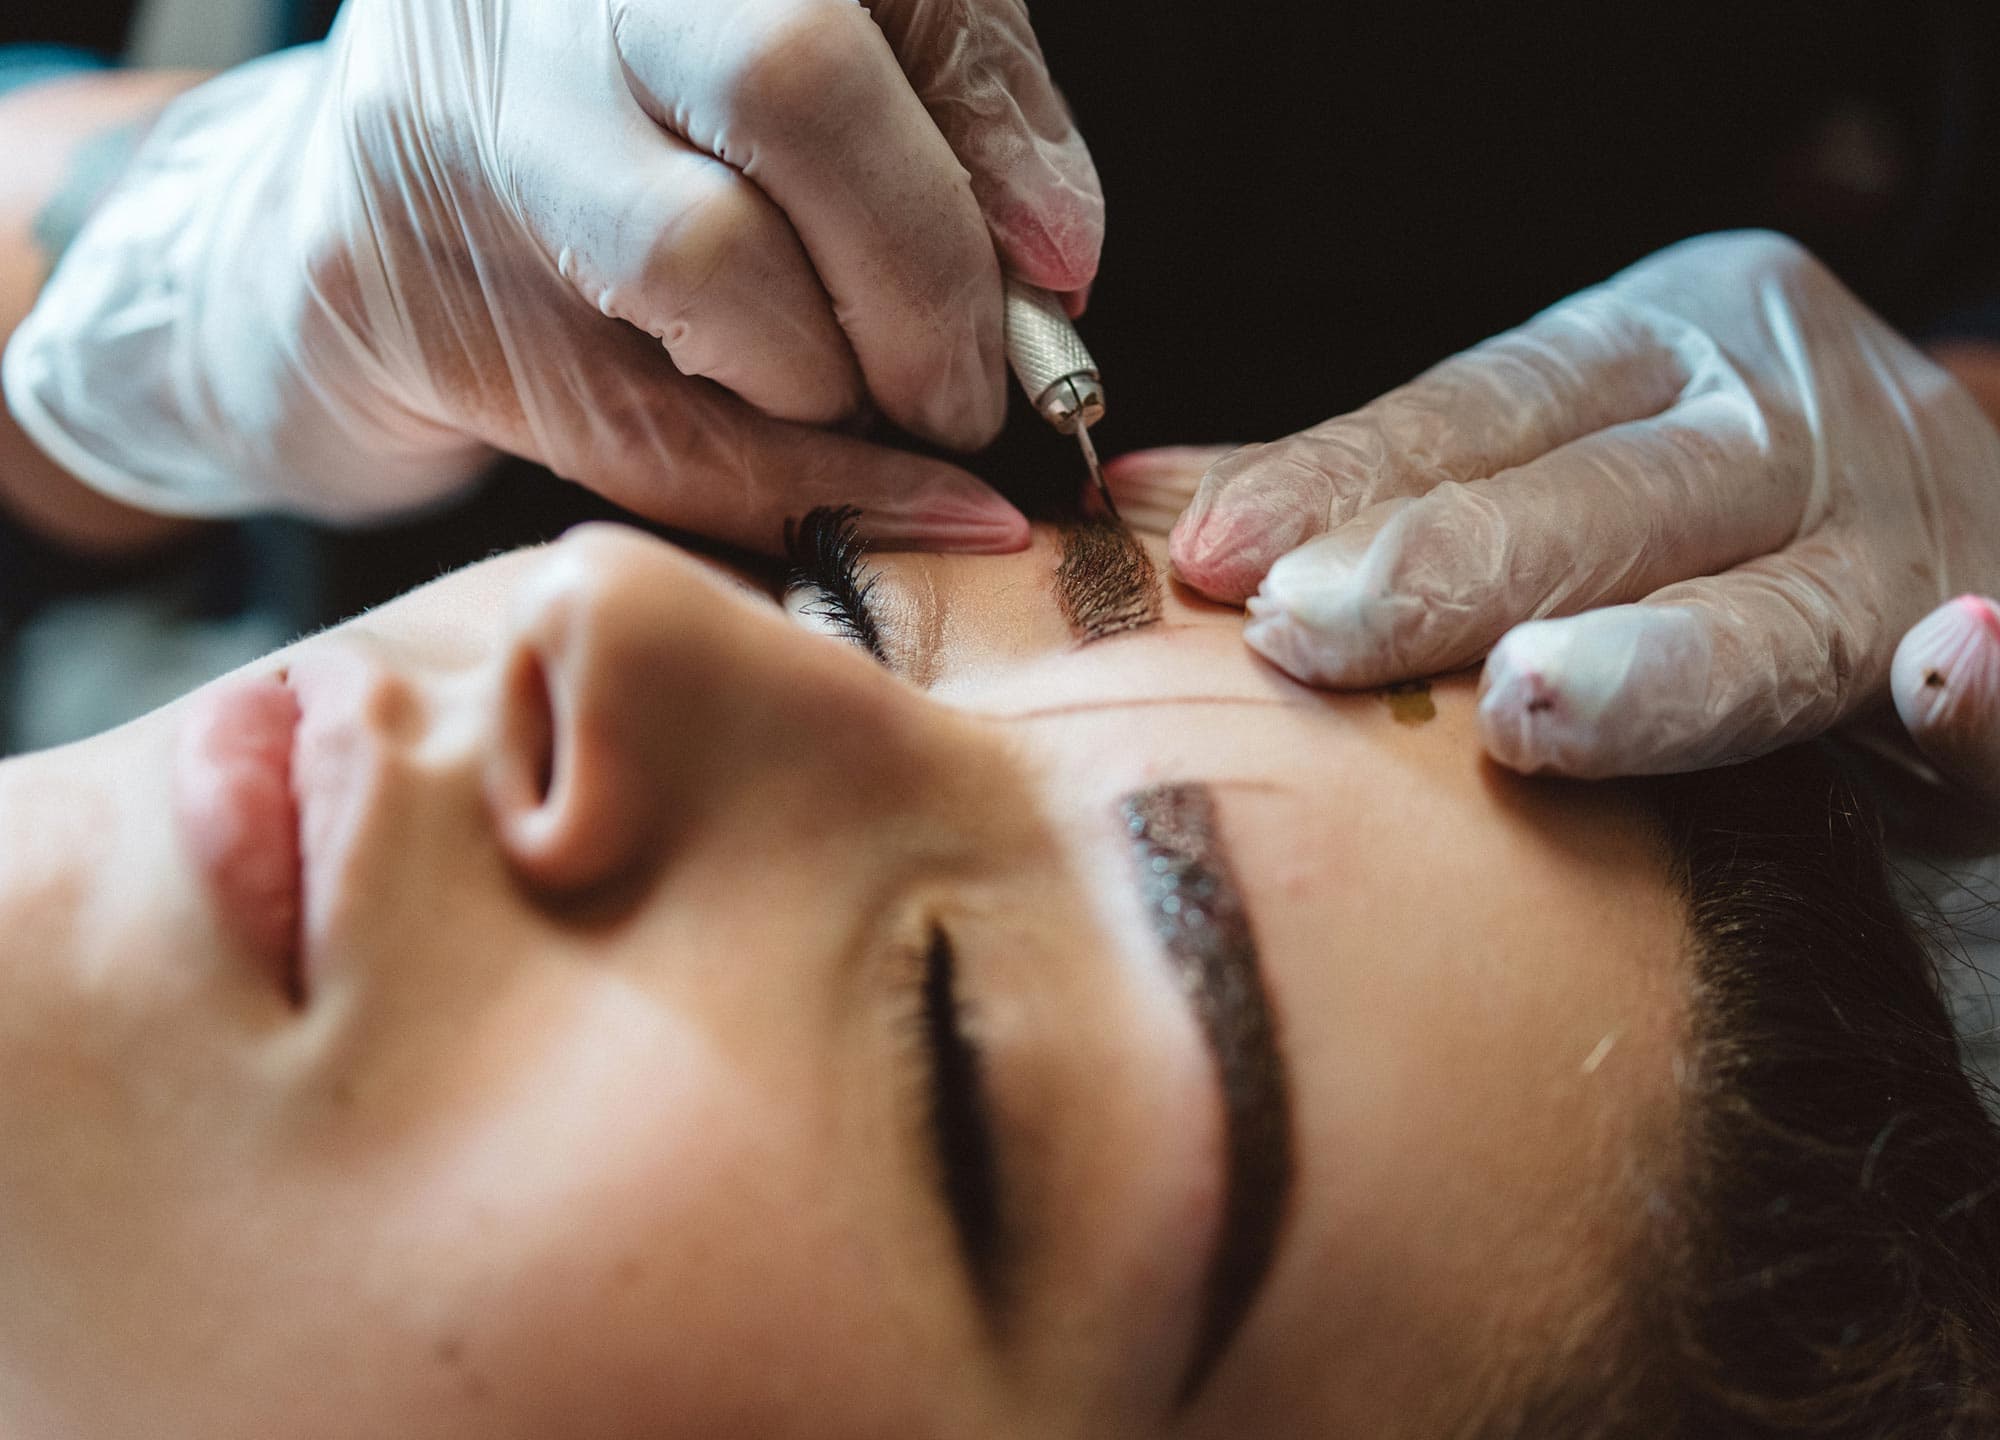 Microblading revisions are possible, but it's important to get a pro involved. Here's what to do if you hate your microblading results.